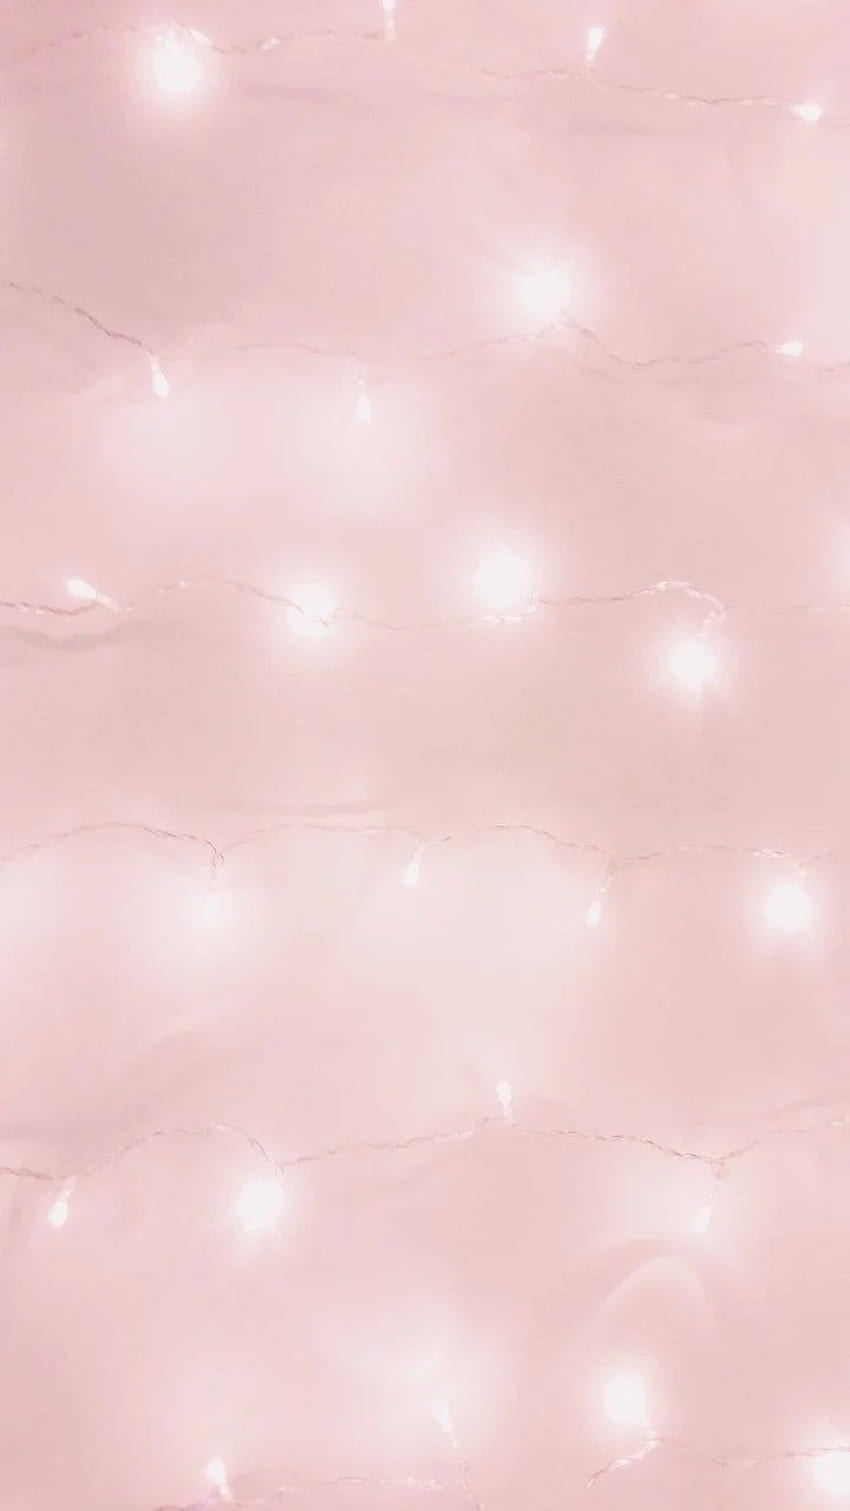 A close up of pink lights on the wall - Soft pink, light pink